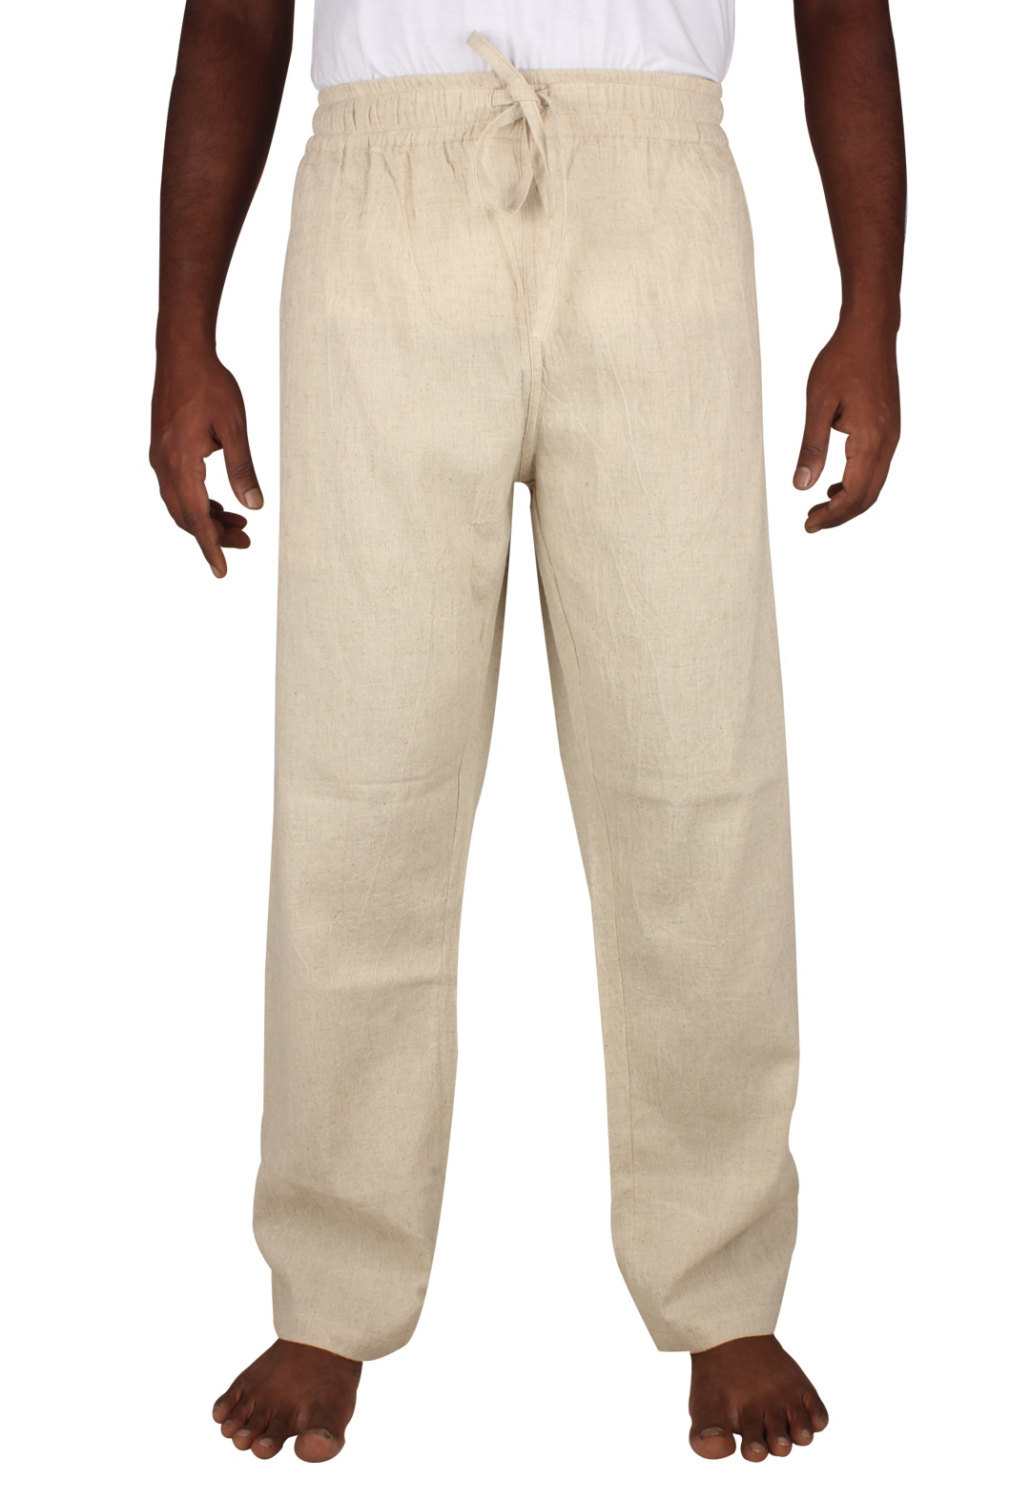 Mens Linen Drawstring pants Baggy Look without Zipper Regular and Plus ...